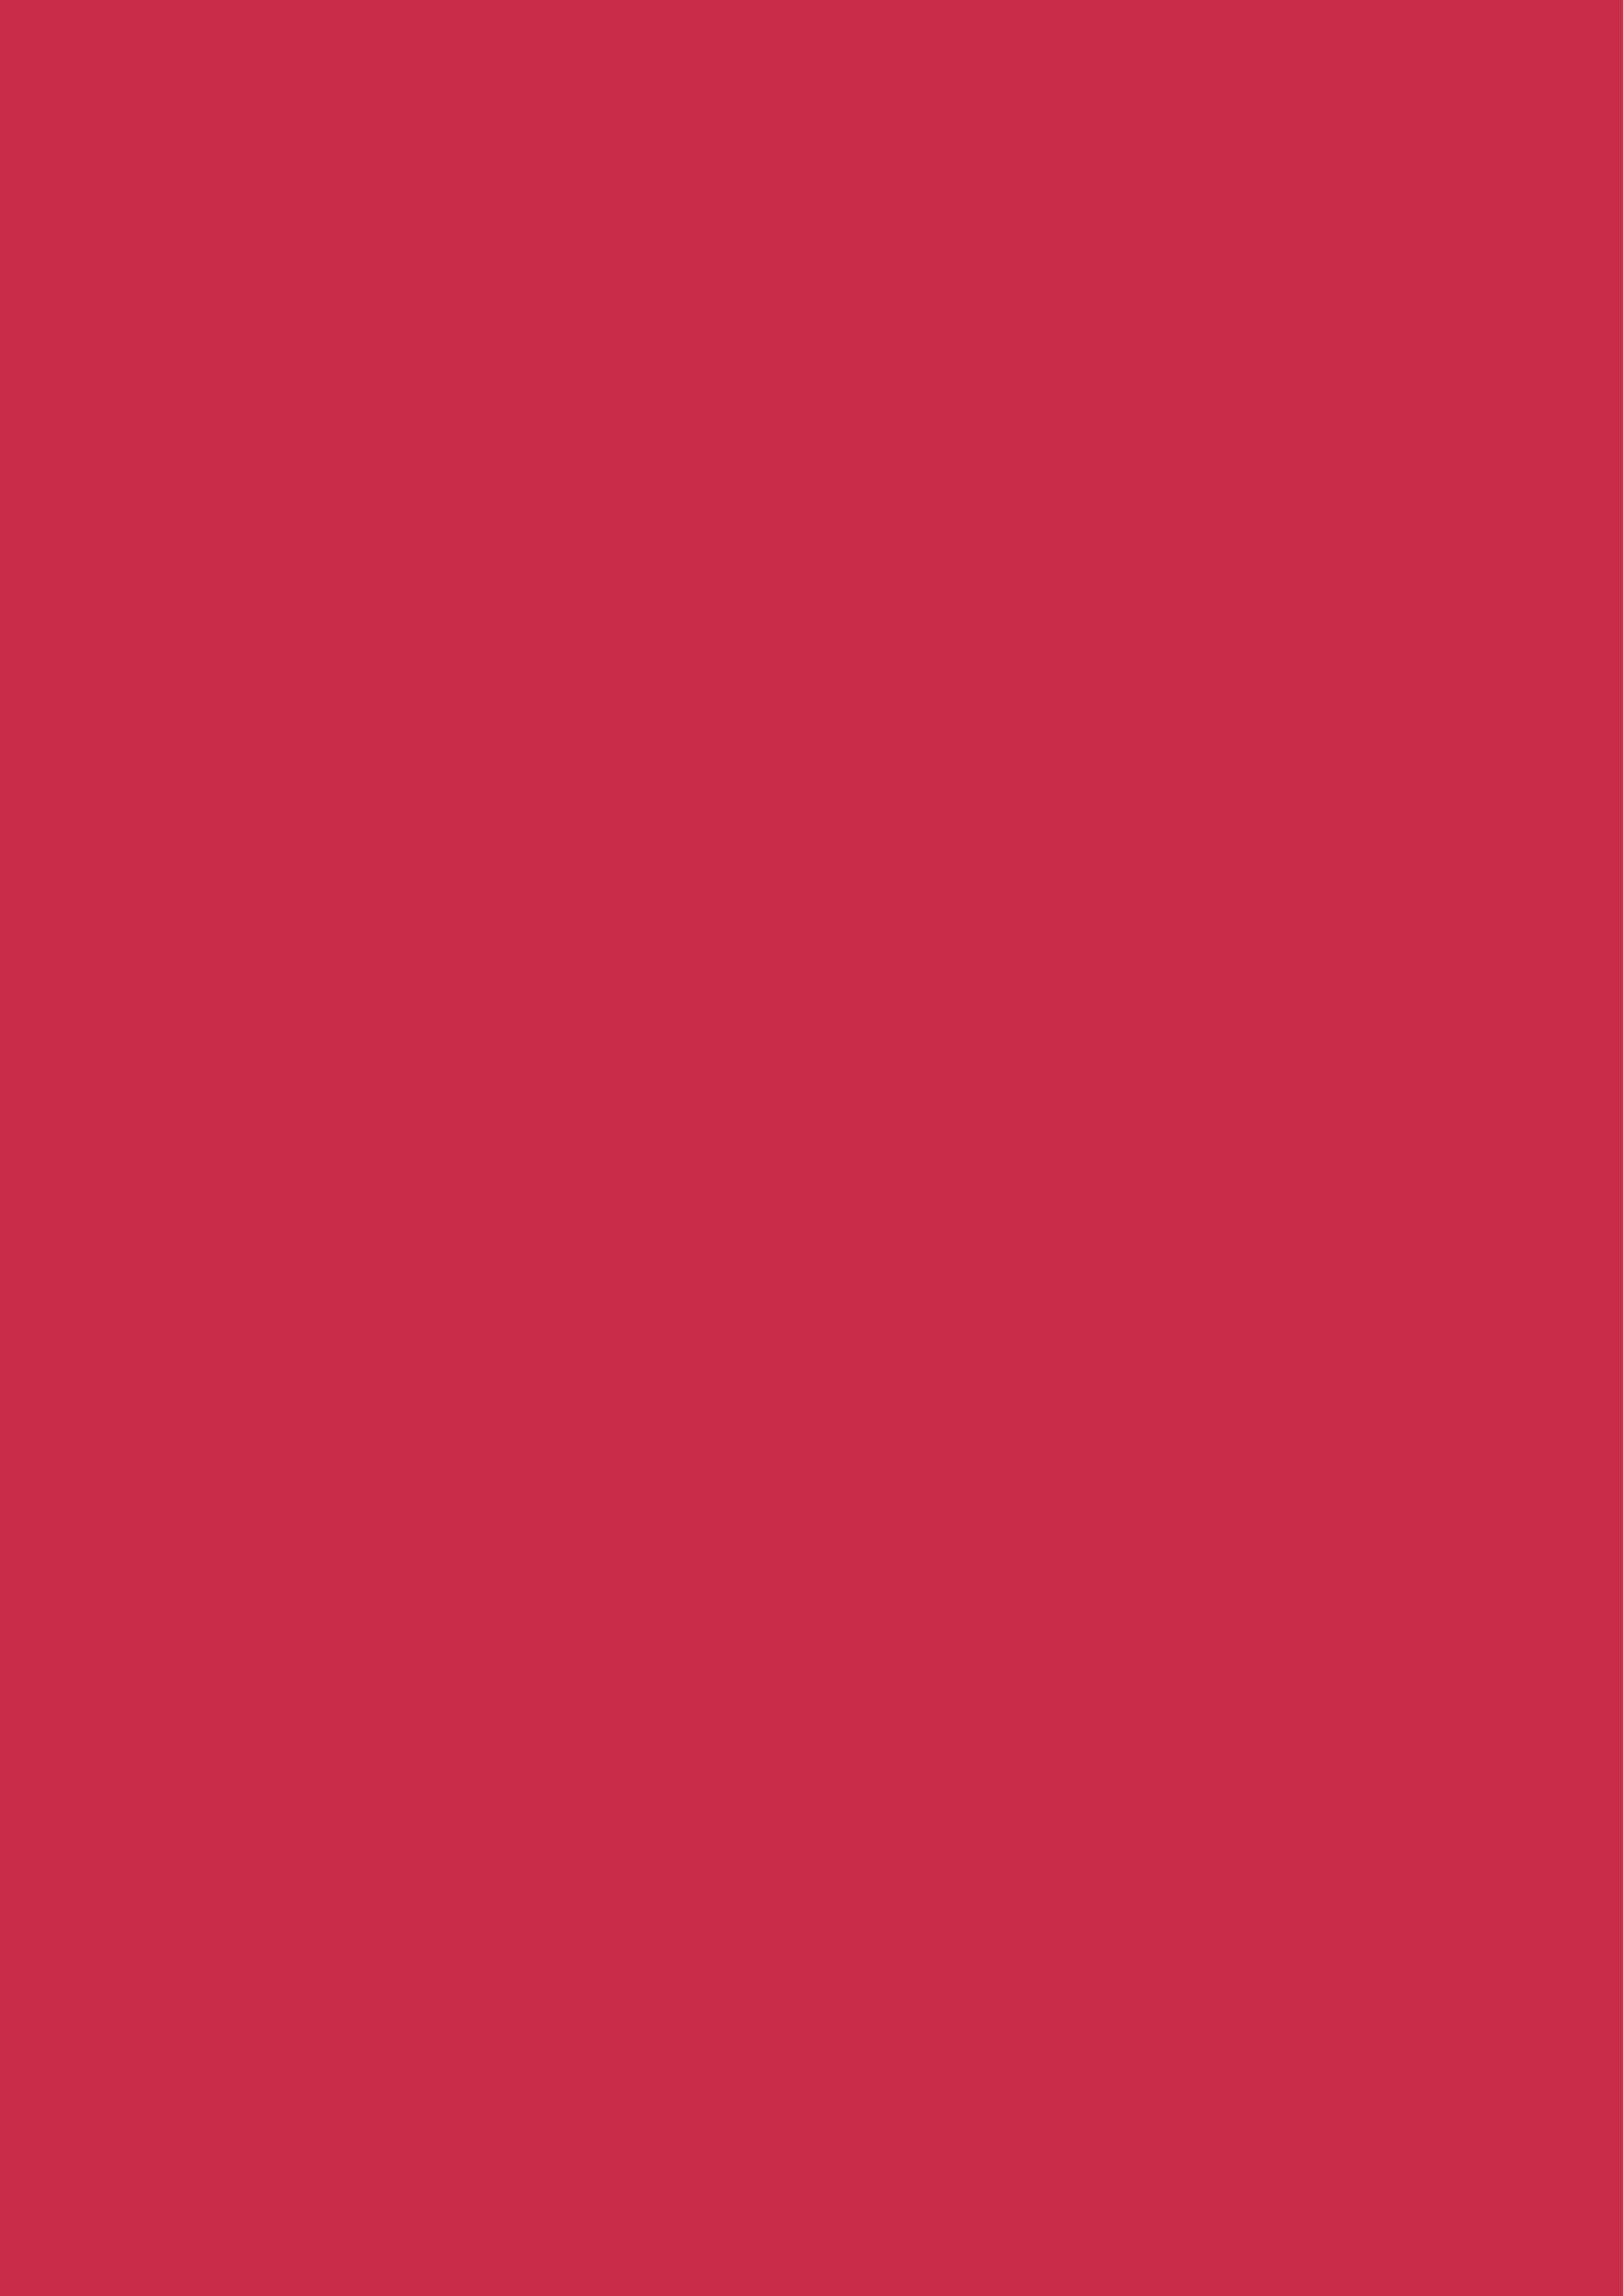 2480x3508 French Raspberry Solid Color Background